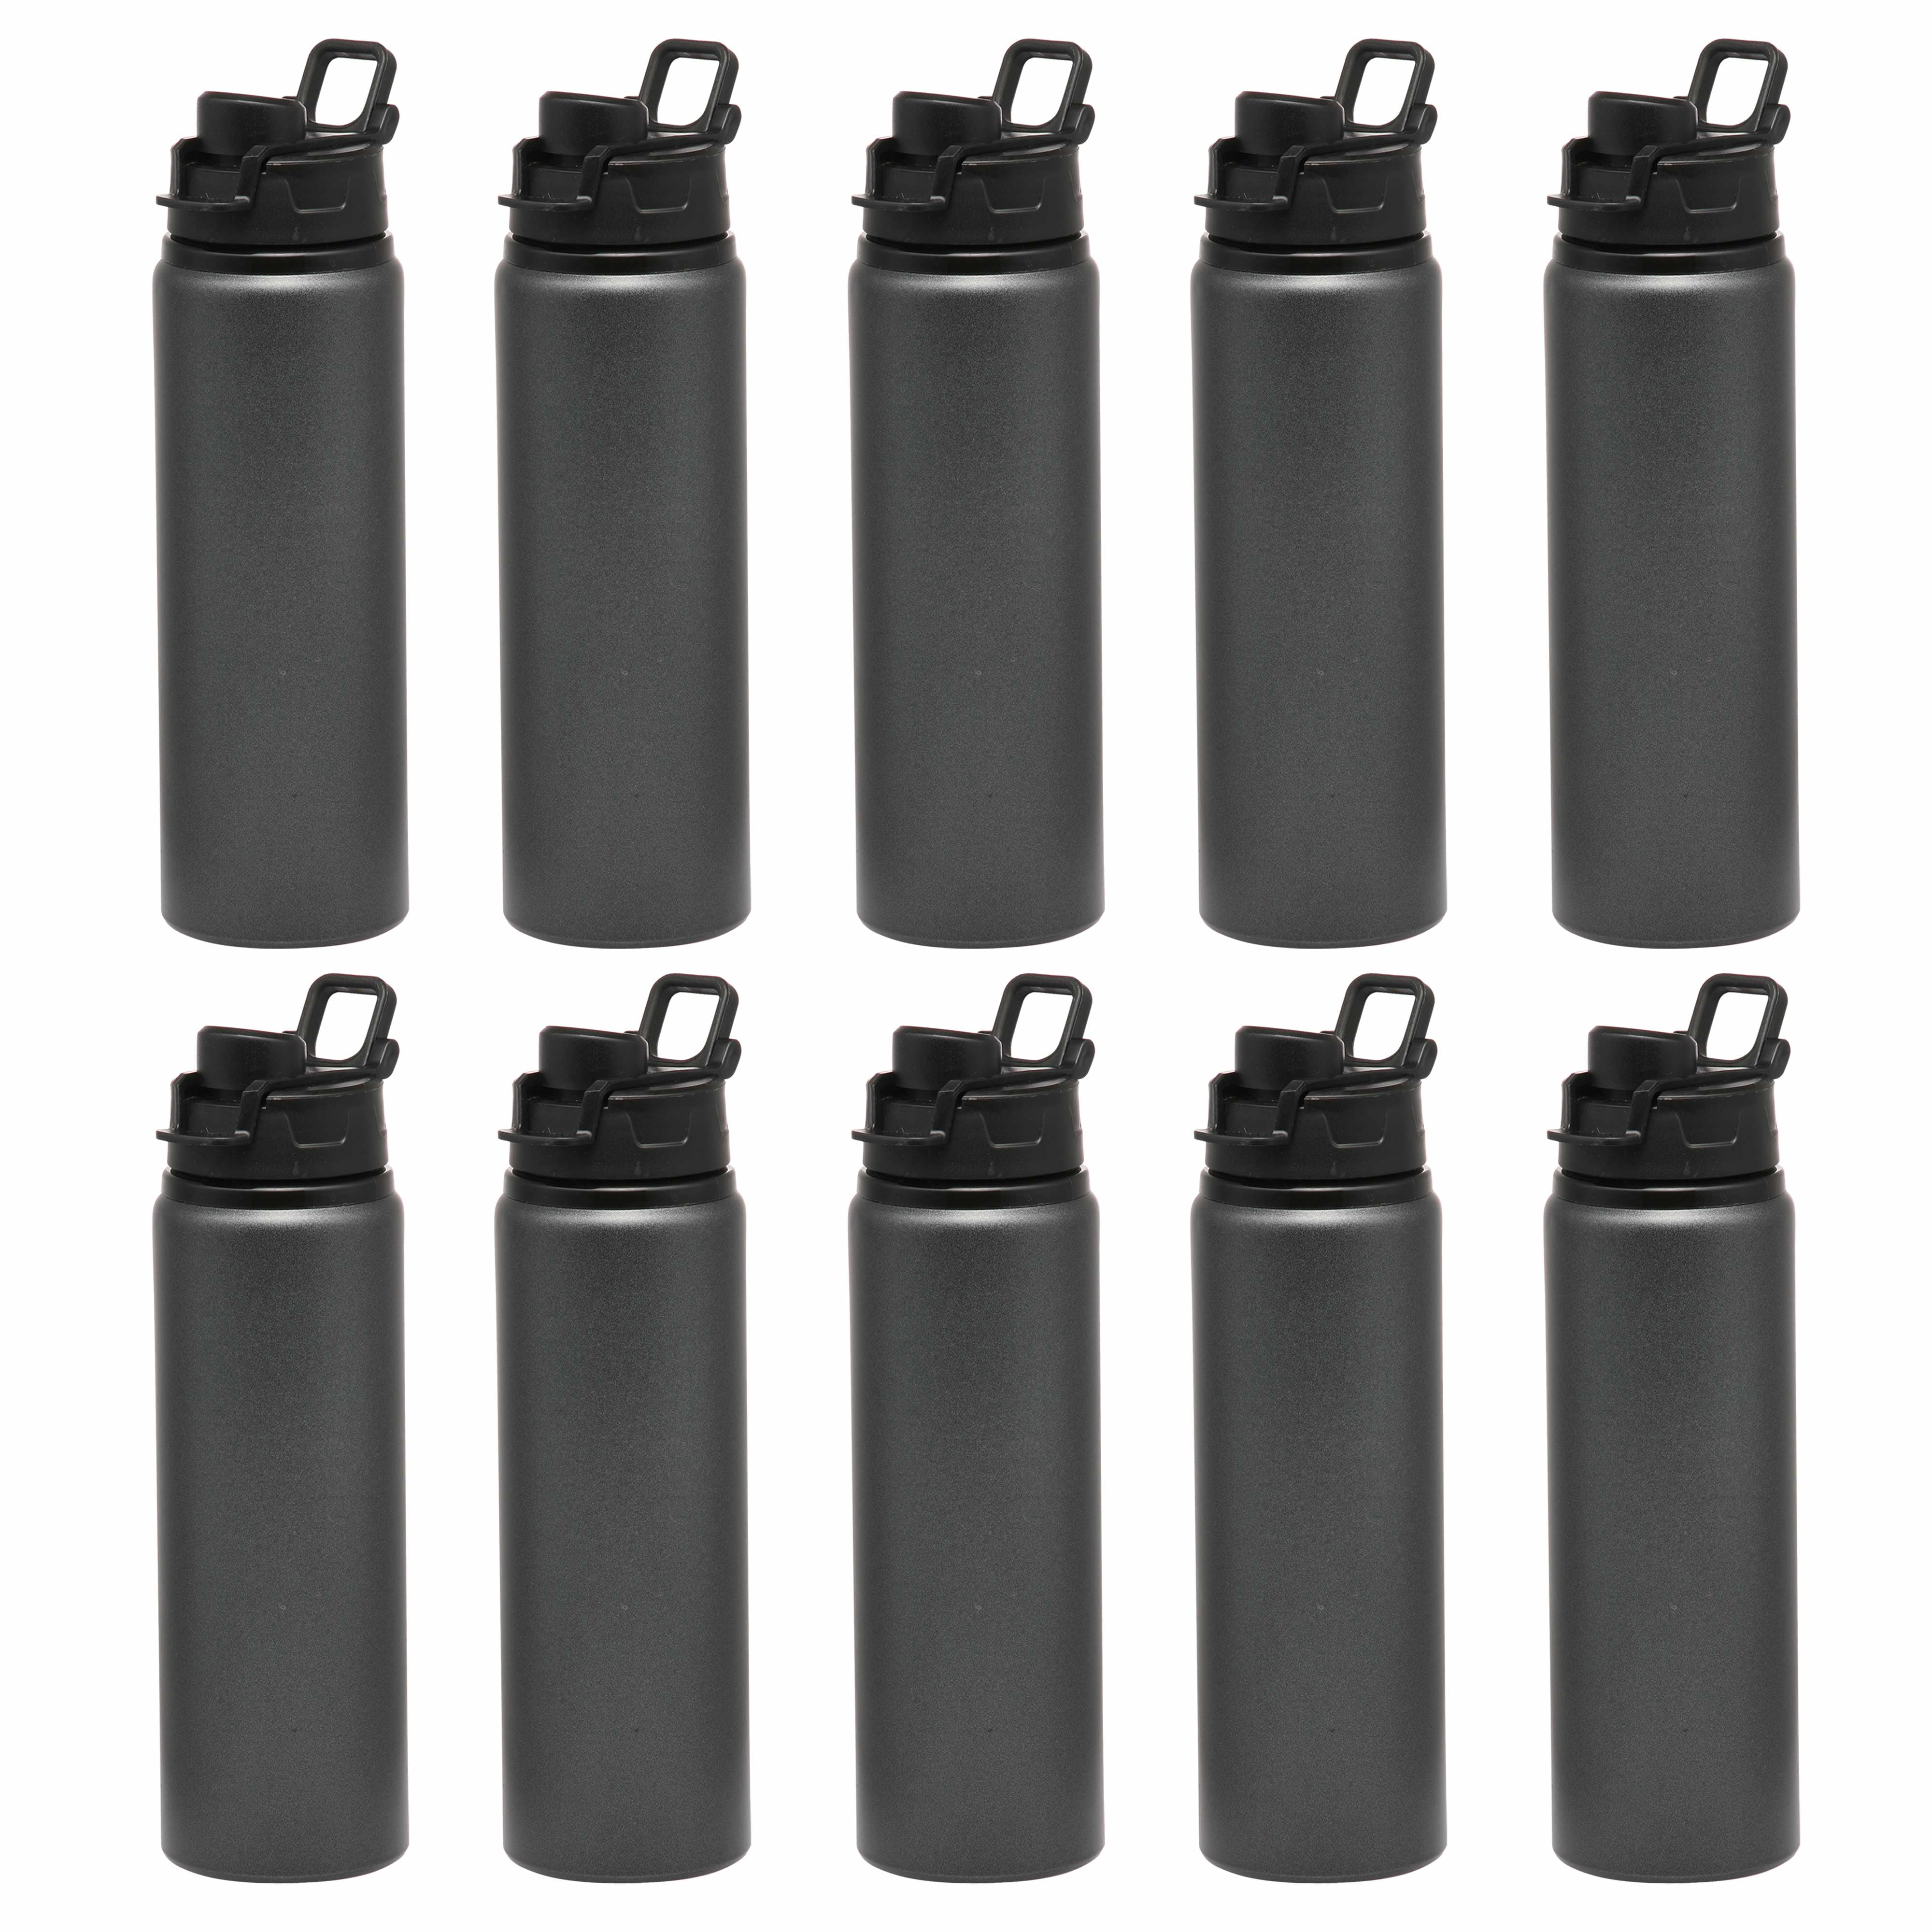 10 Pieces 25oz Reusable Aluminum Water Bottles Bulk Multicolor Outdoor  Sports Water Bottles Multipack Travel Bottles for Gym, Hiking, Cycling